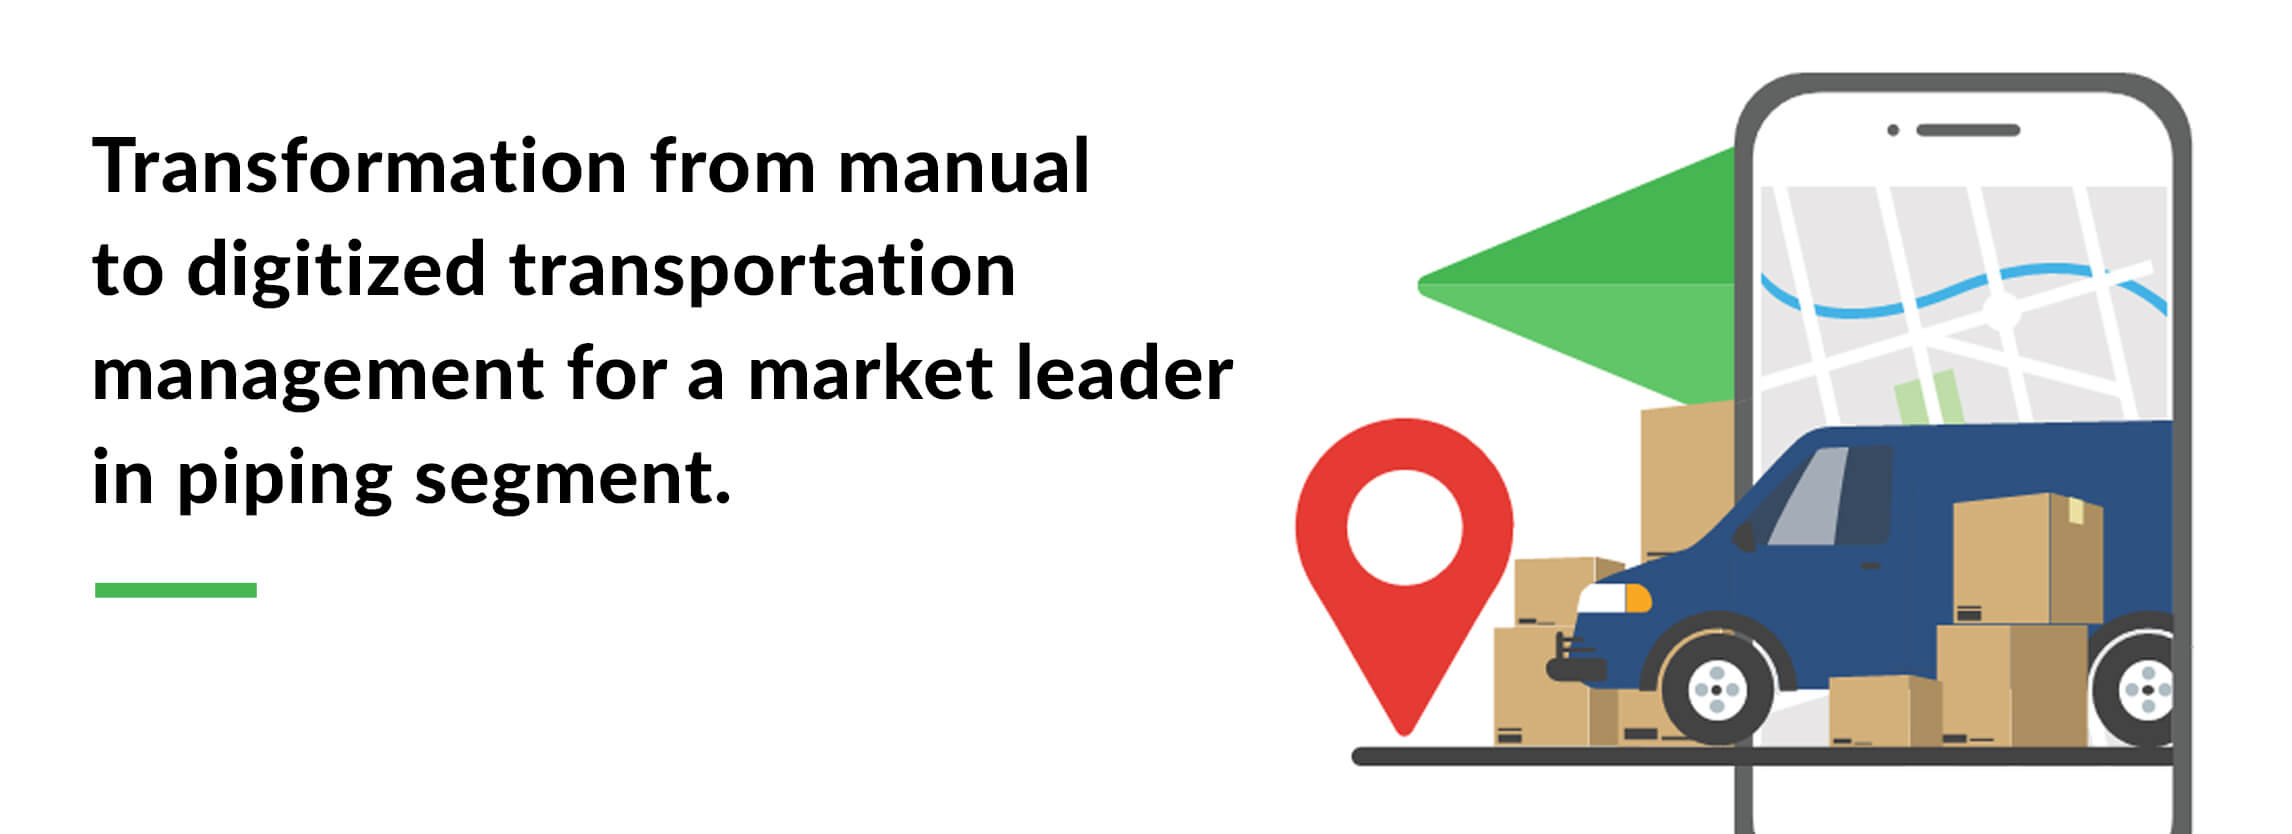 Transformation from manual to digitized transportation management for a market leader in piping segment.